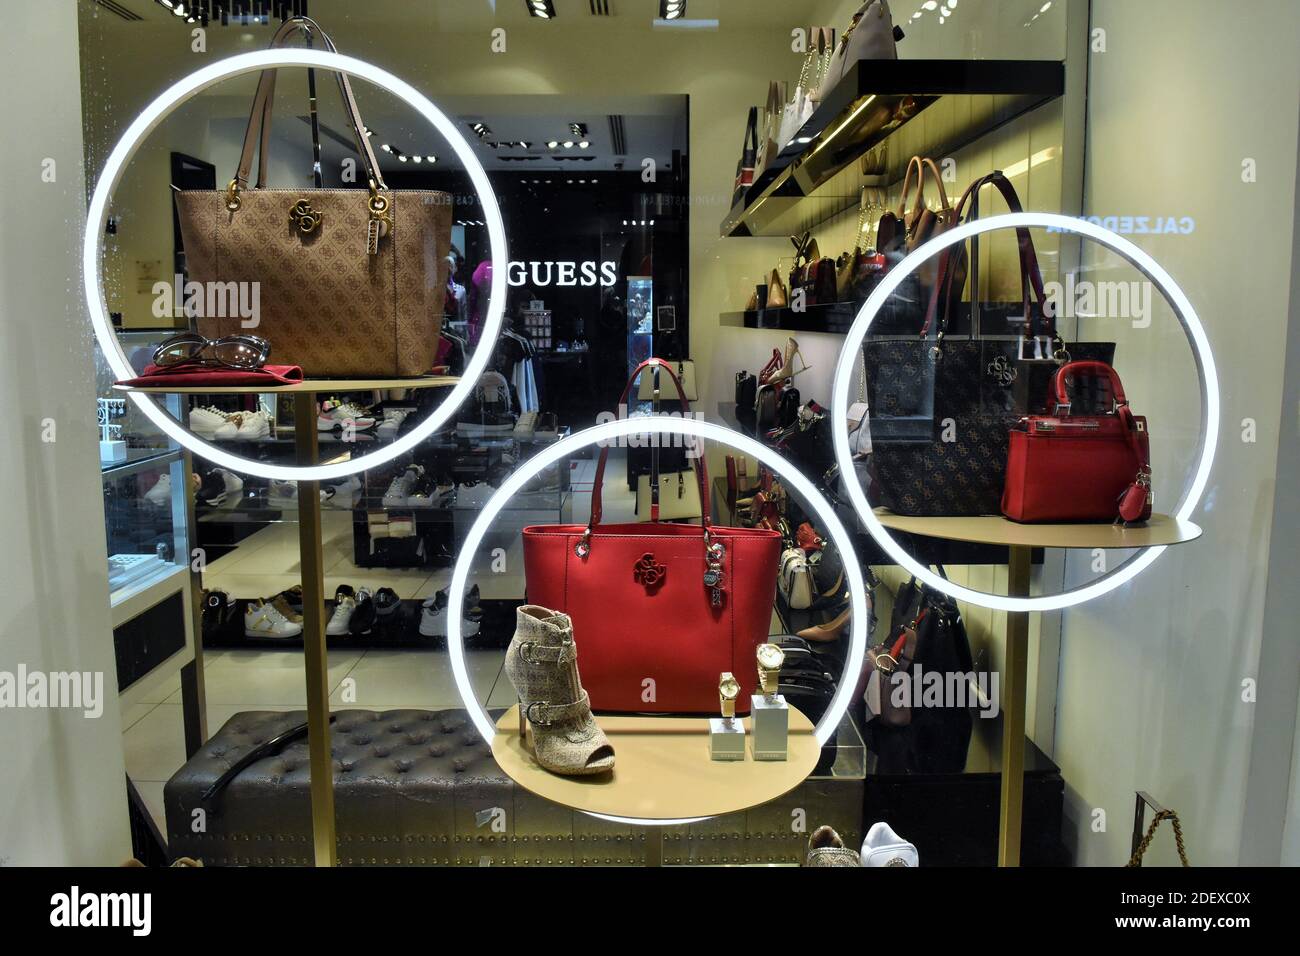 BAGS ON DISPALY AT GUESS BOUTIQUE IN FRATTINA STREET Stock Photo - Alamy